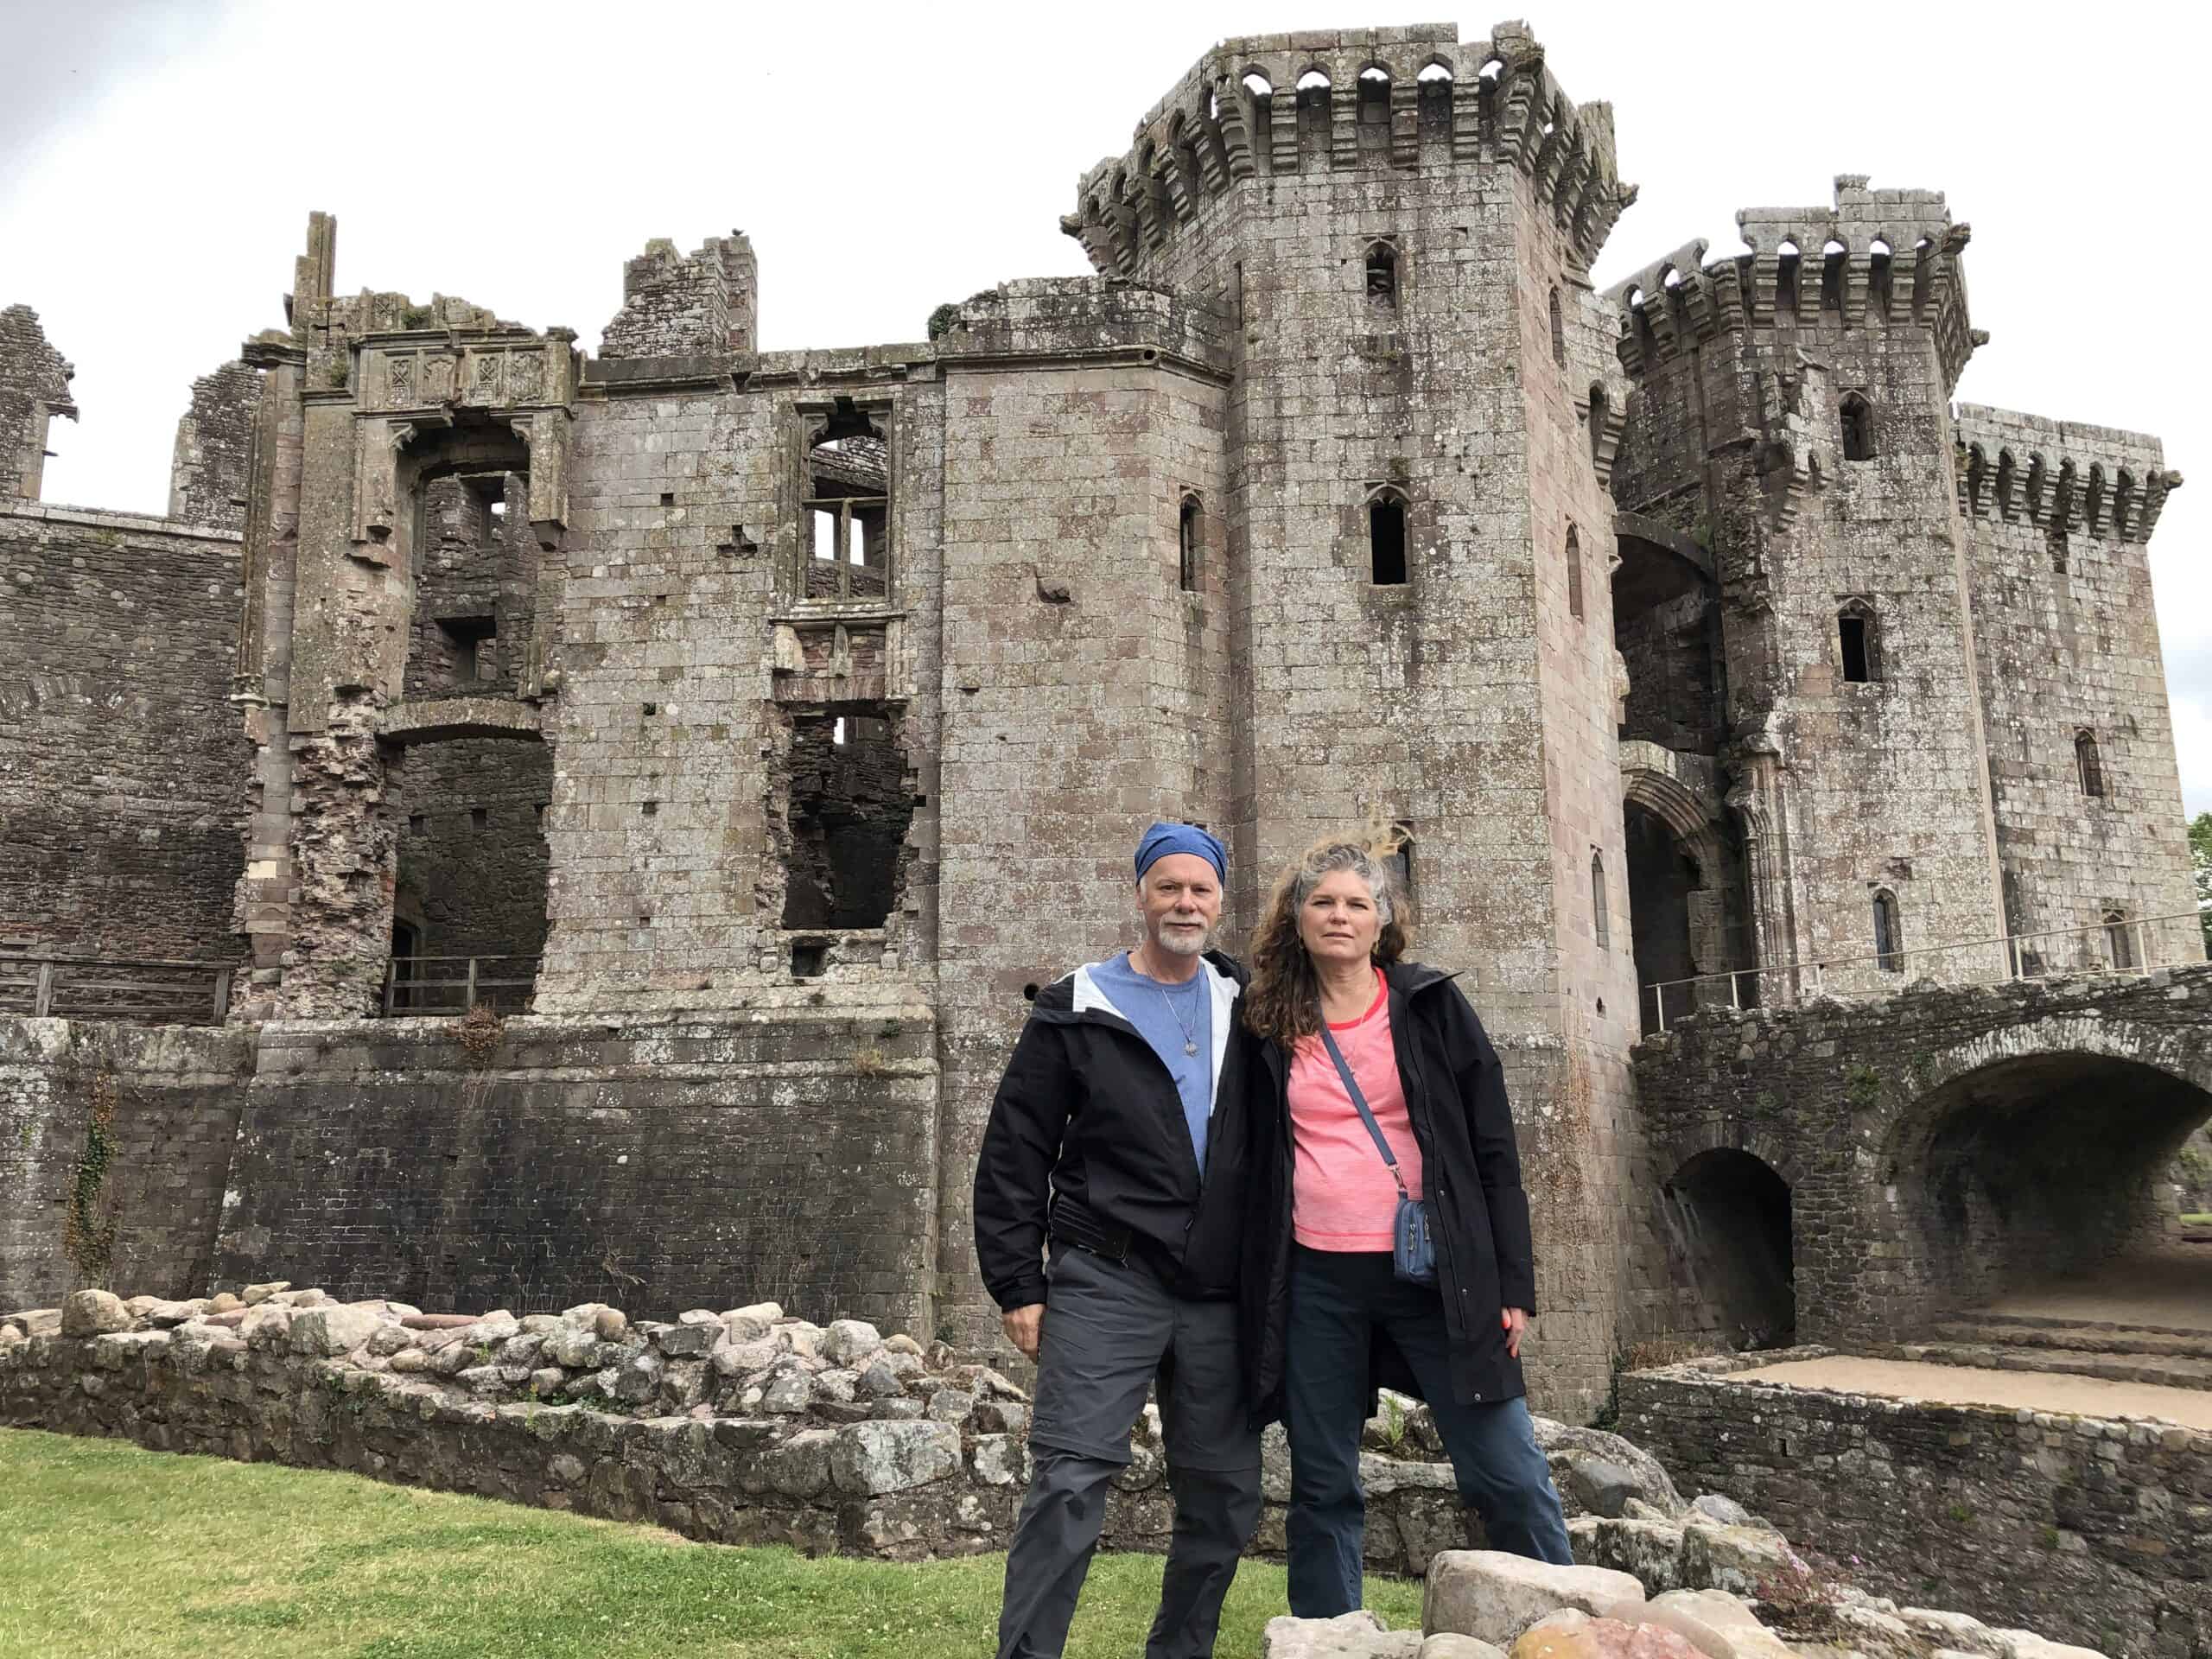 We're tracing Welsh ancestry in Raglan. The Places Where We Go visit Raglan Castle.